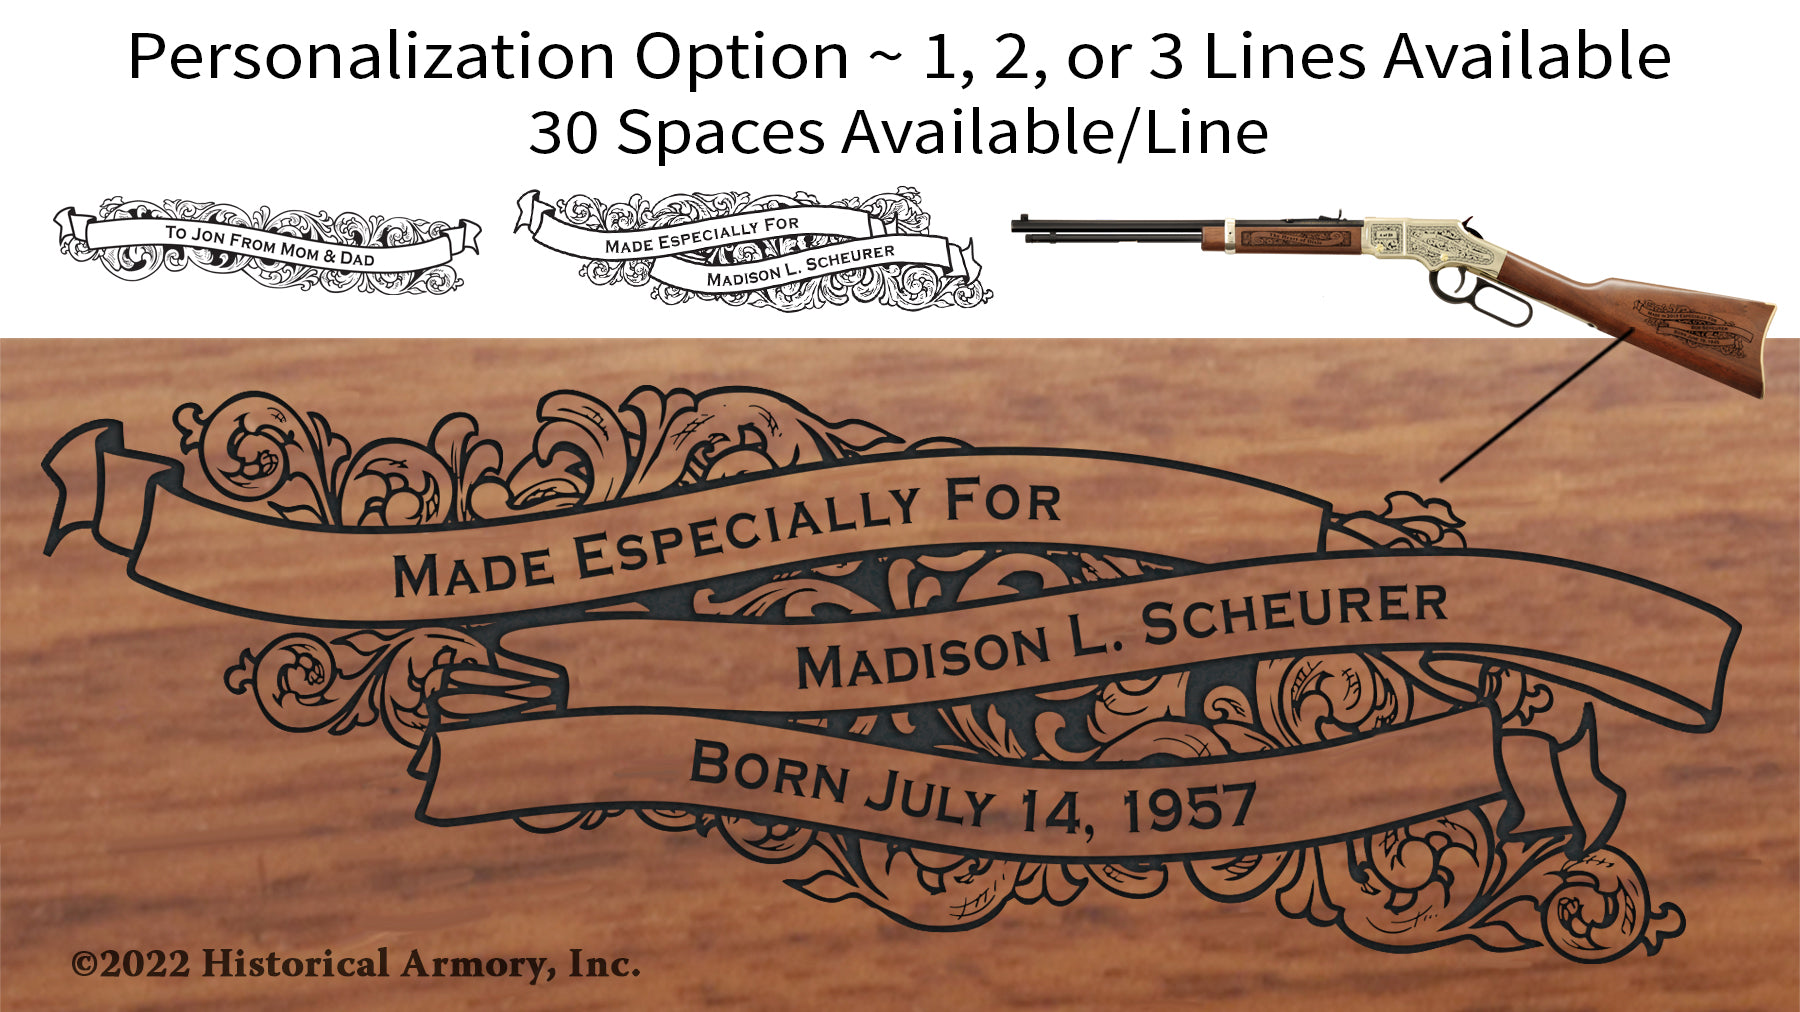 Gibson County Indiana Engraved Rifle Personalization